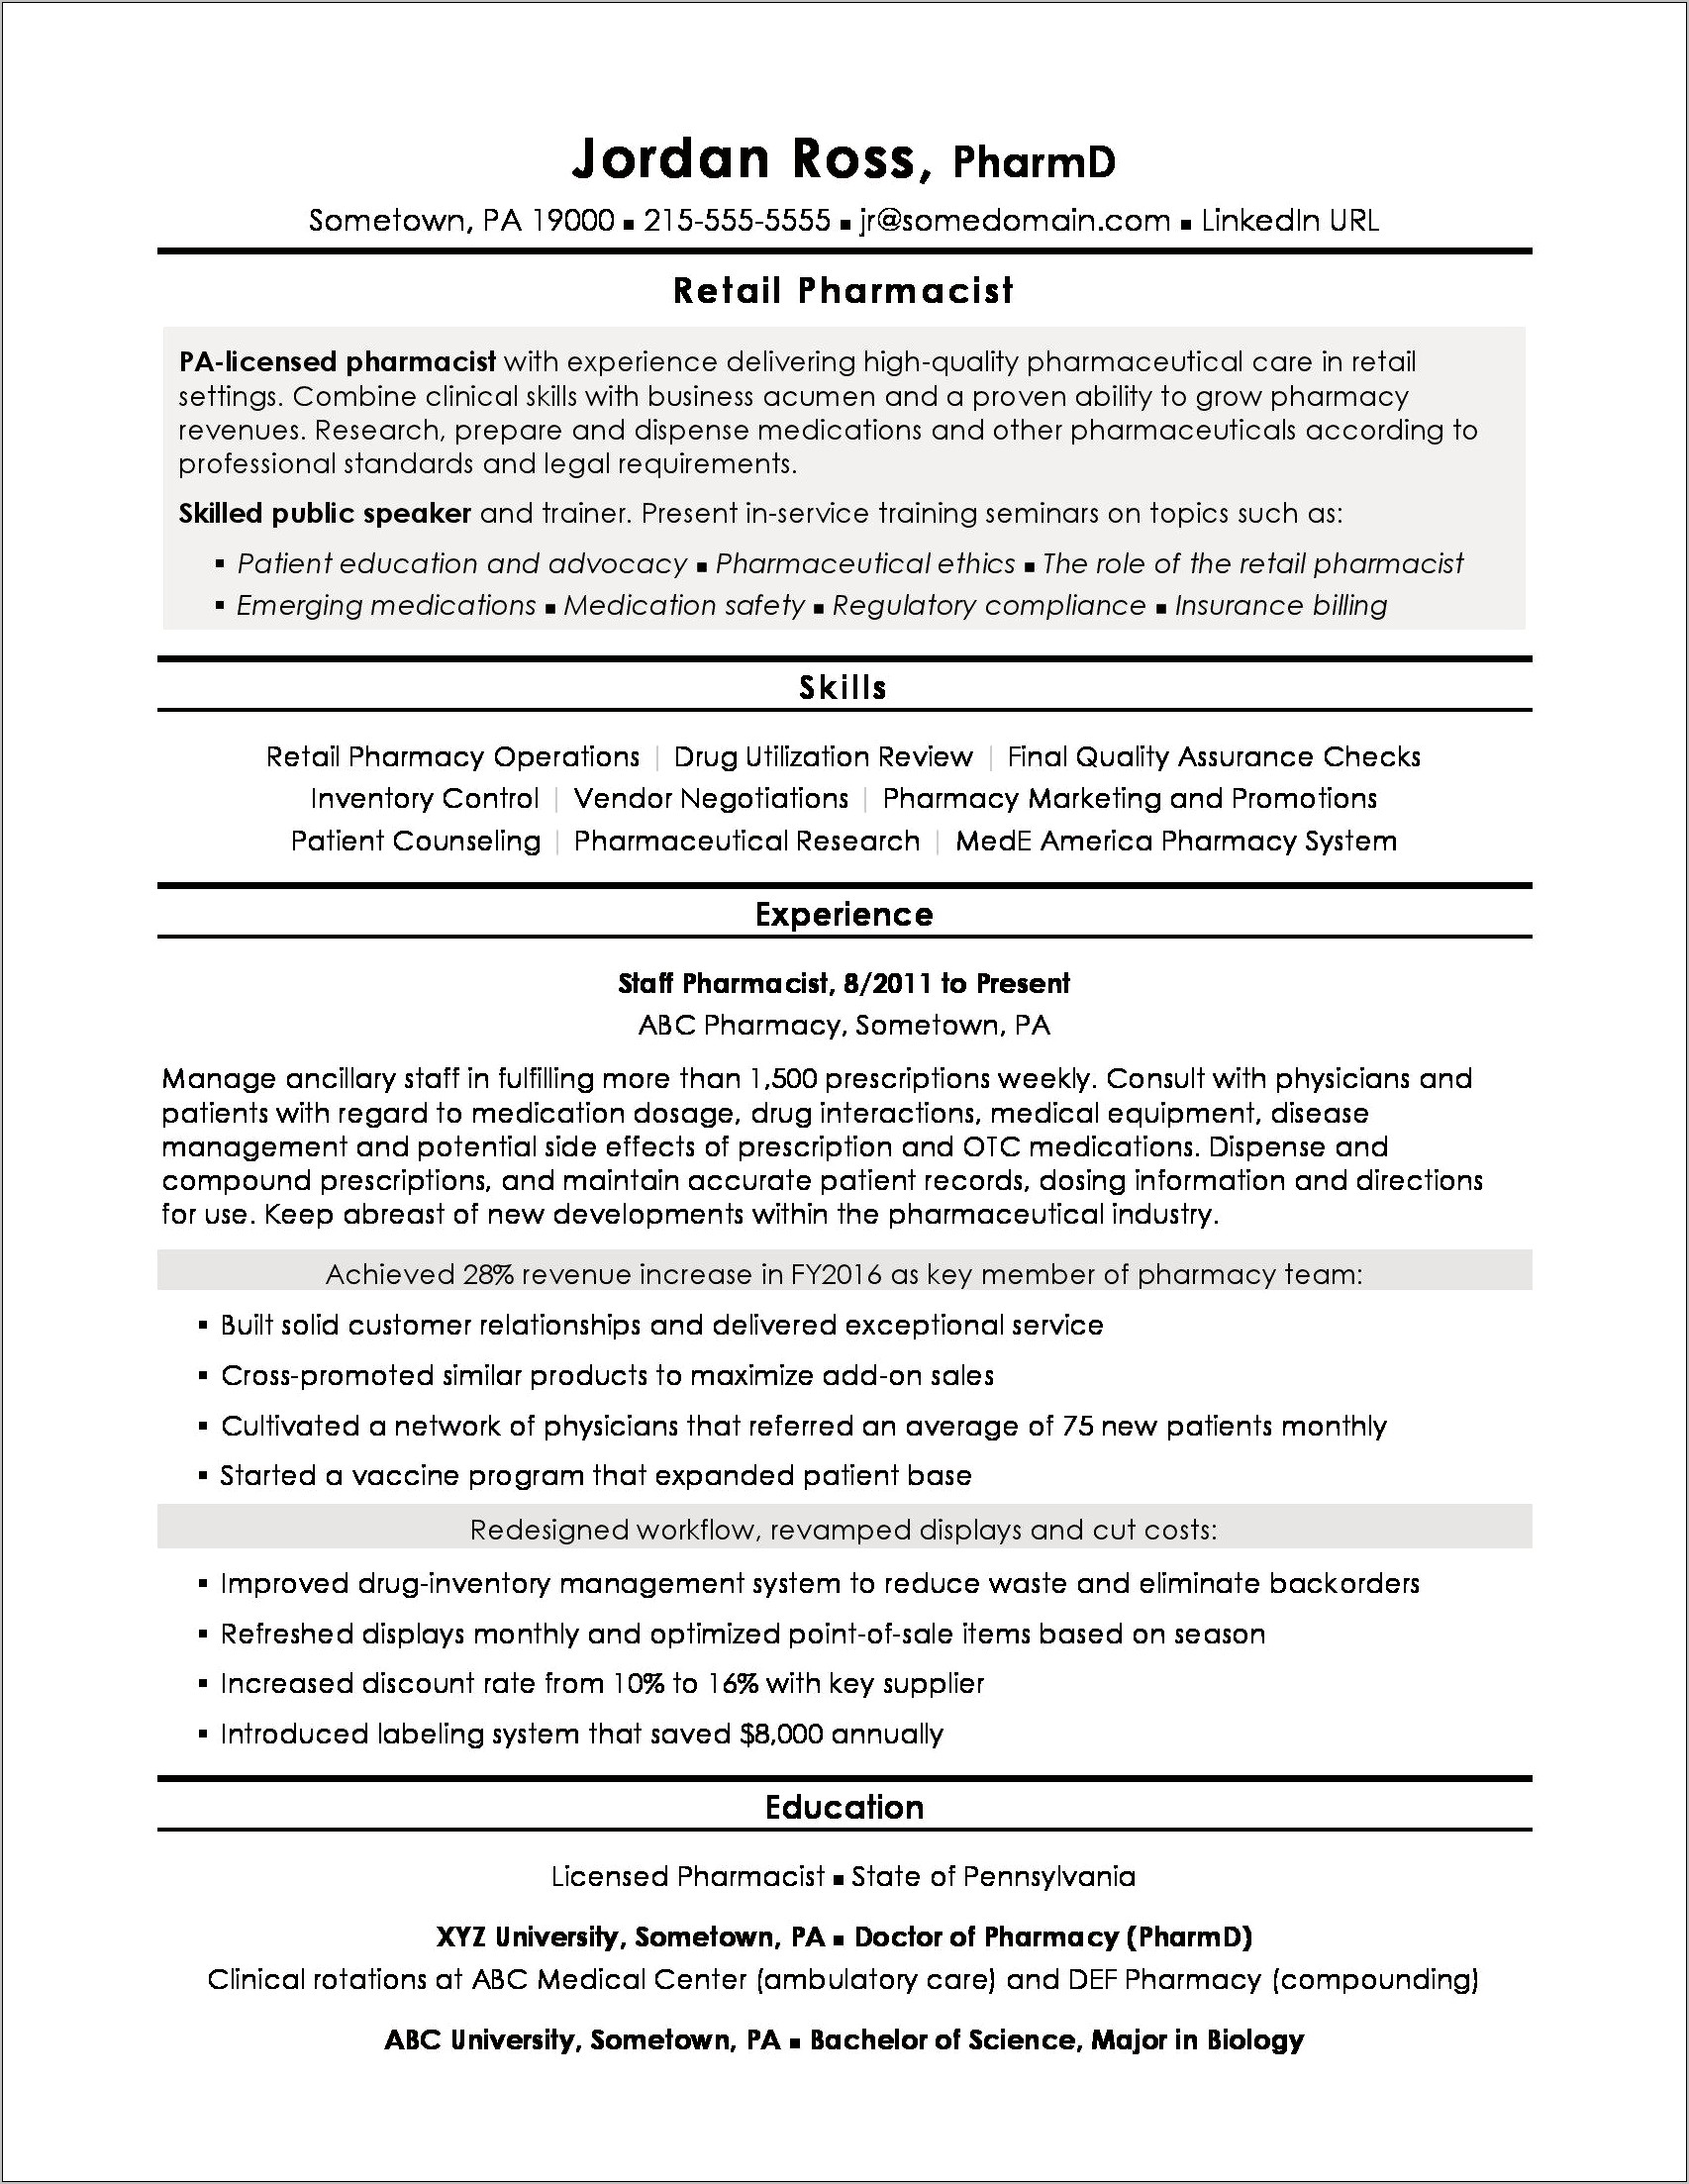 Resume Example For Vp Of Operations For Staffing